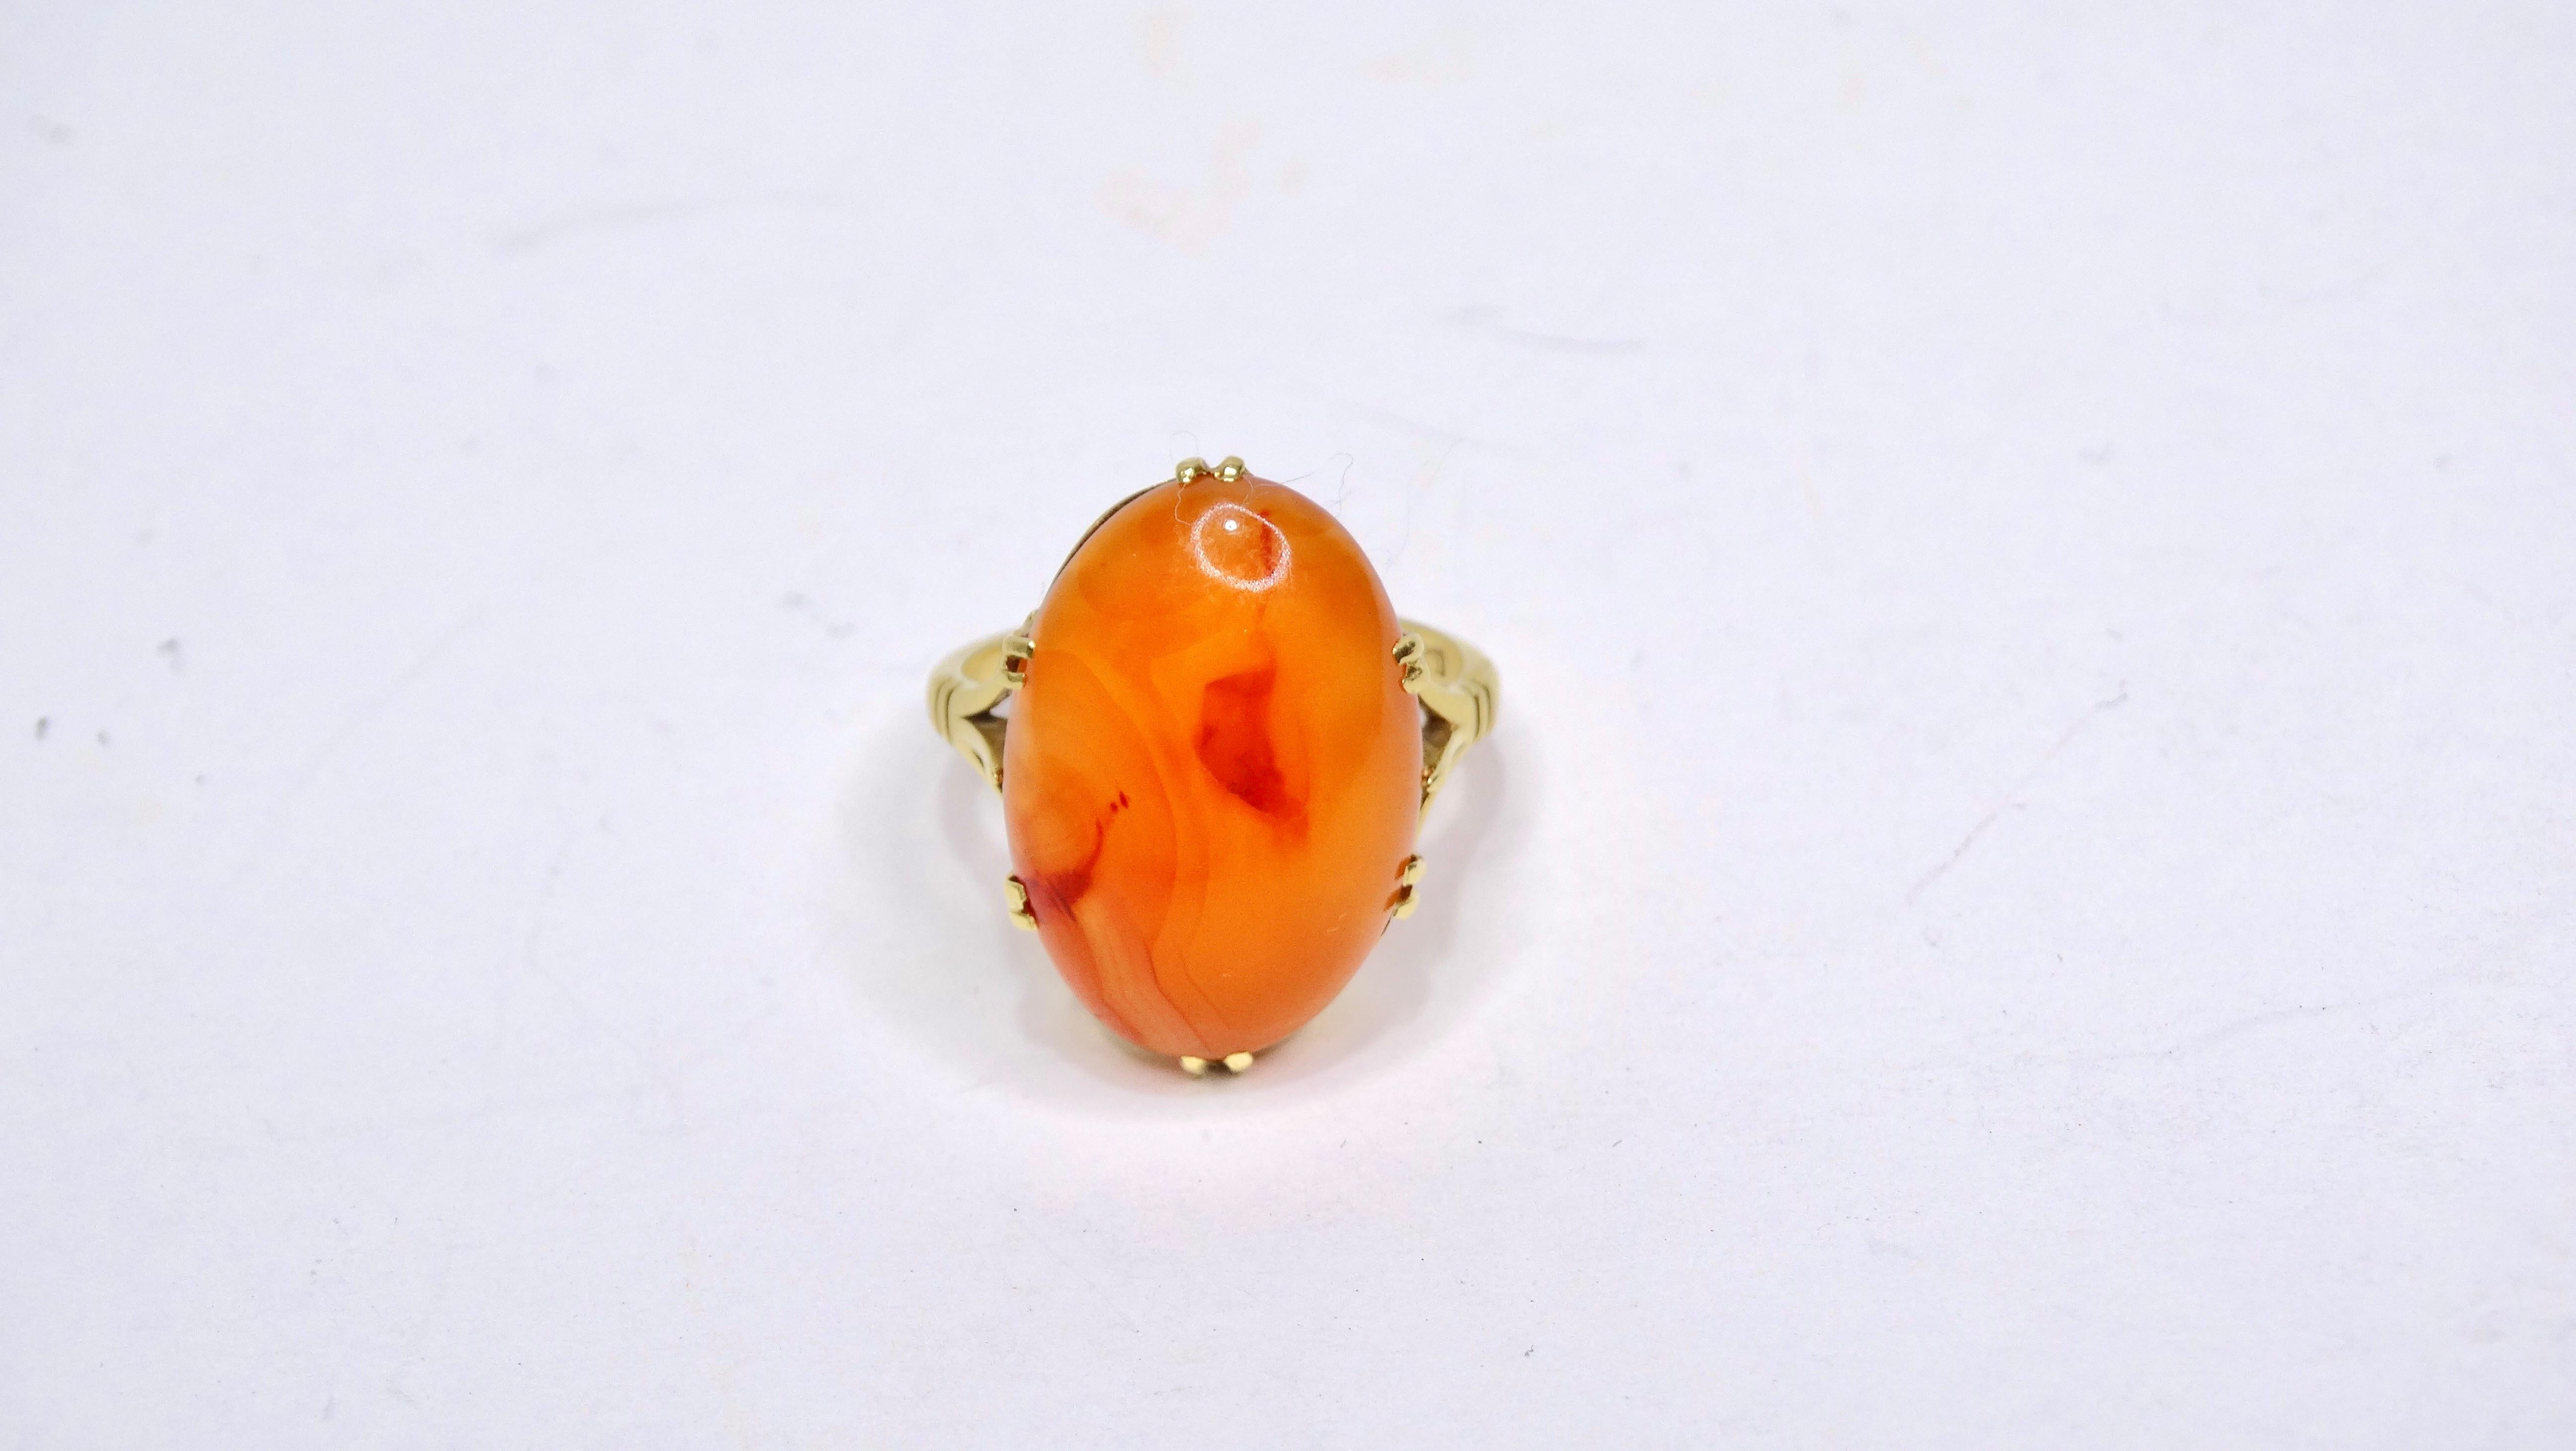 This impeccably designed ring can be yours today! Don't miss your chance to get your hands on this huge Orange Jade stone in an oval cut. Orange Jade brings joy and teaches the interconnectedness of all beings. This will be your new favorite fashion